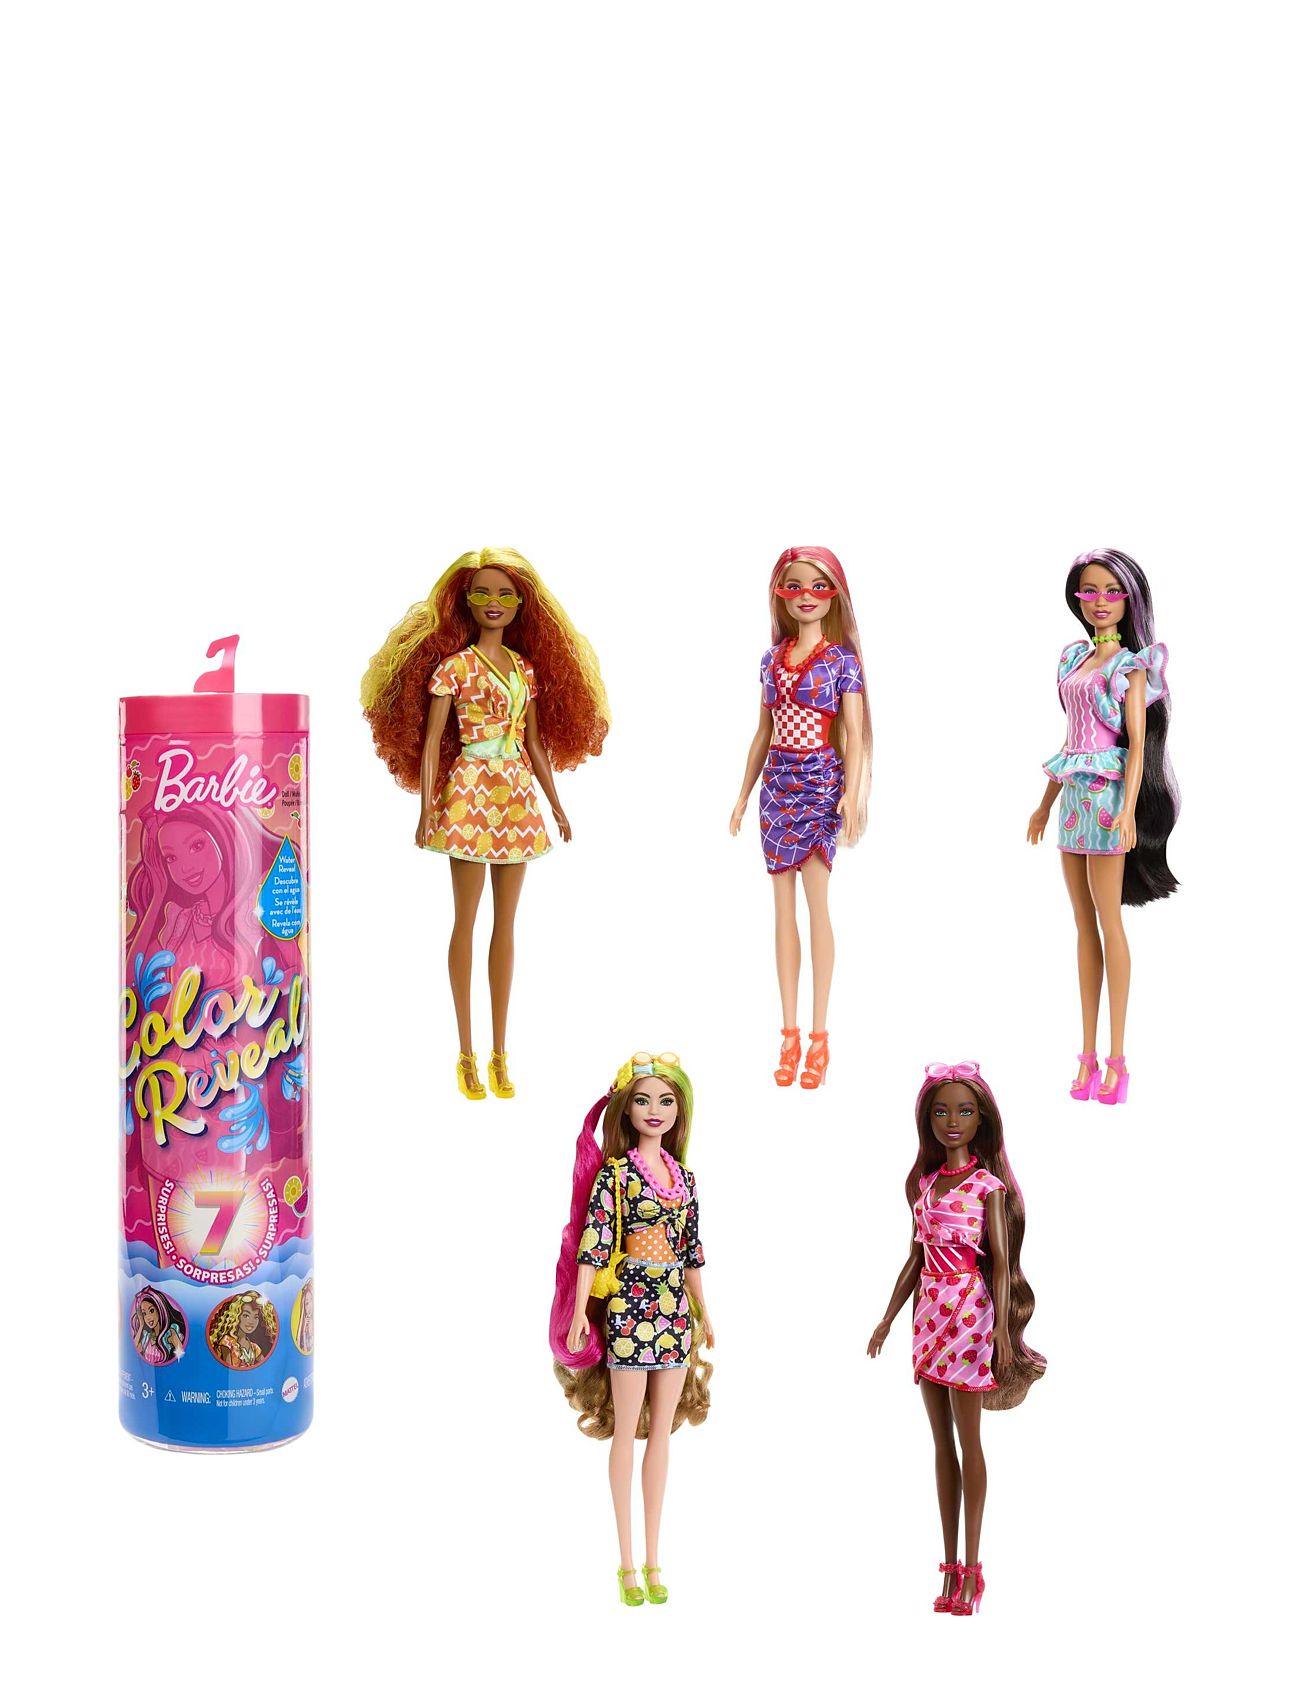 Color Reveal Doll Assortment Toys Dolls & Accessories Dolls Multi/patterned Barbie